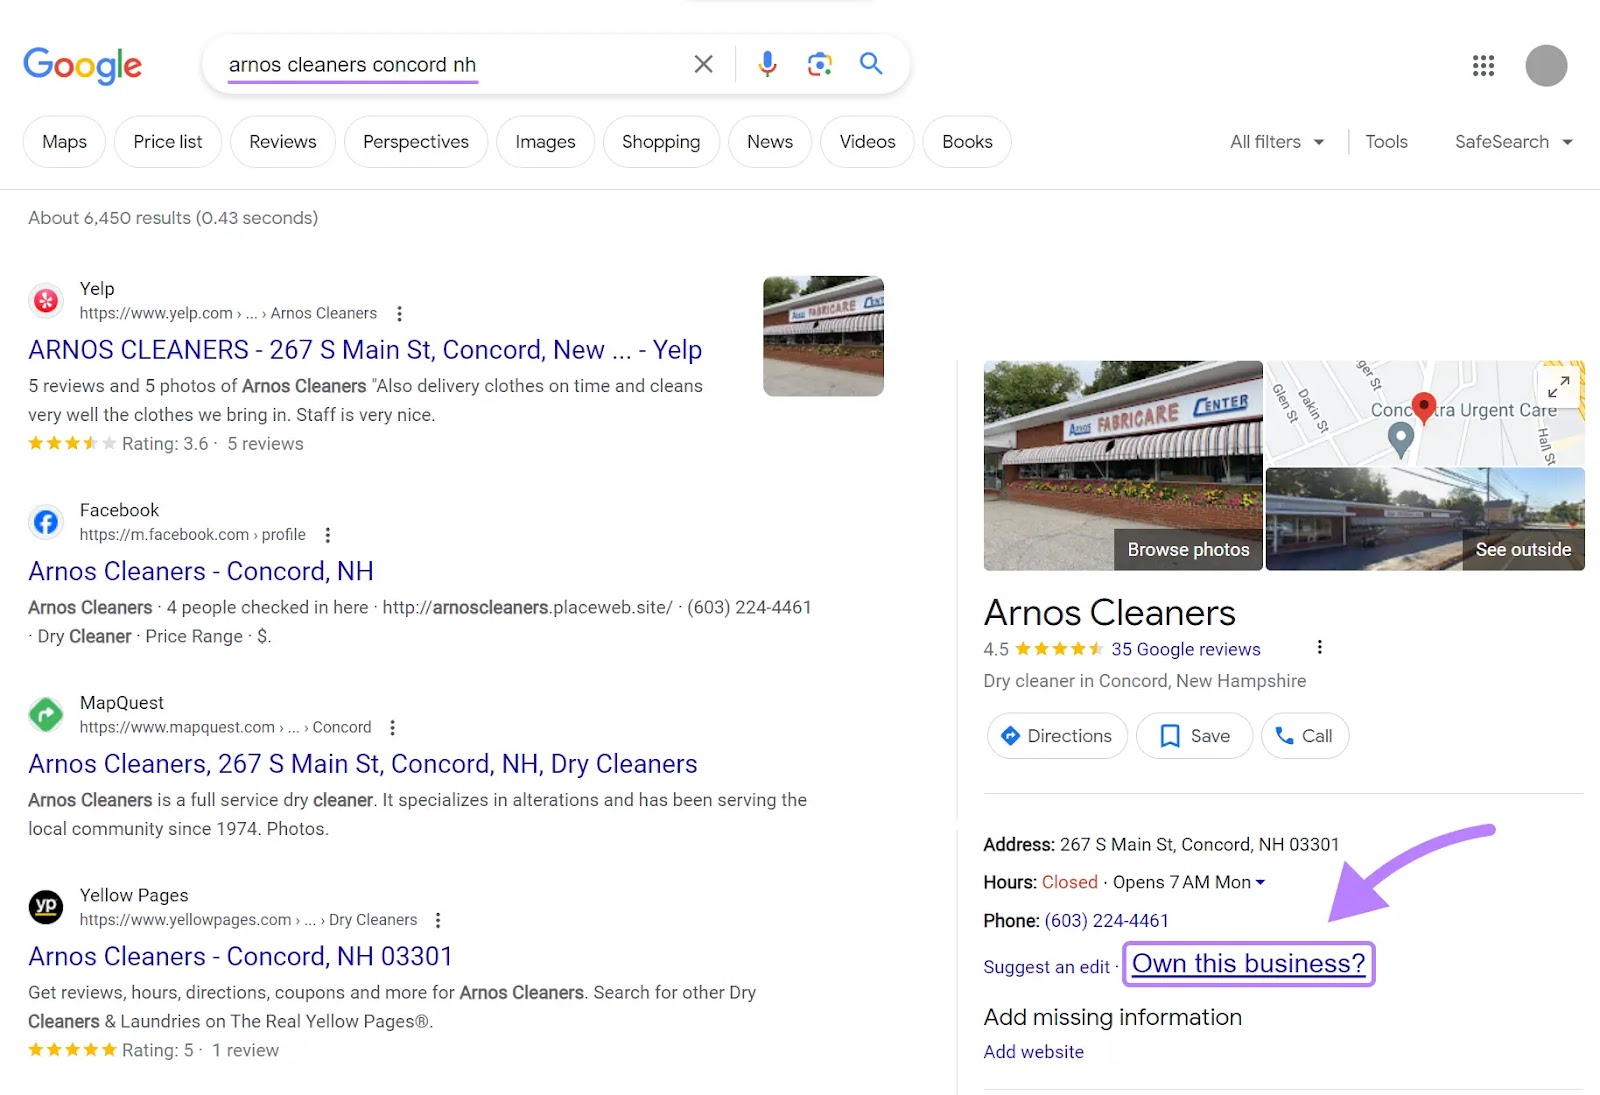 “Own this business?” nexus  highlighted nether  "Arnos Cleaners" concern  connected  Google